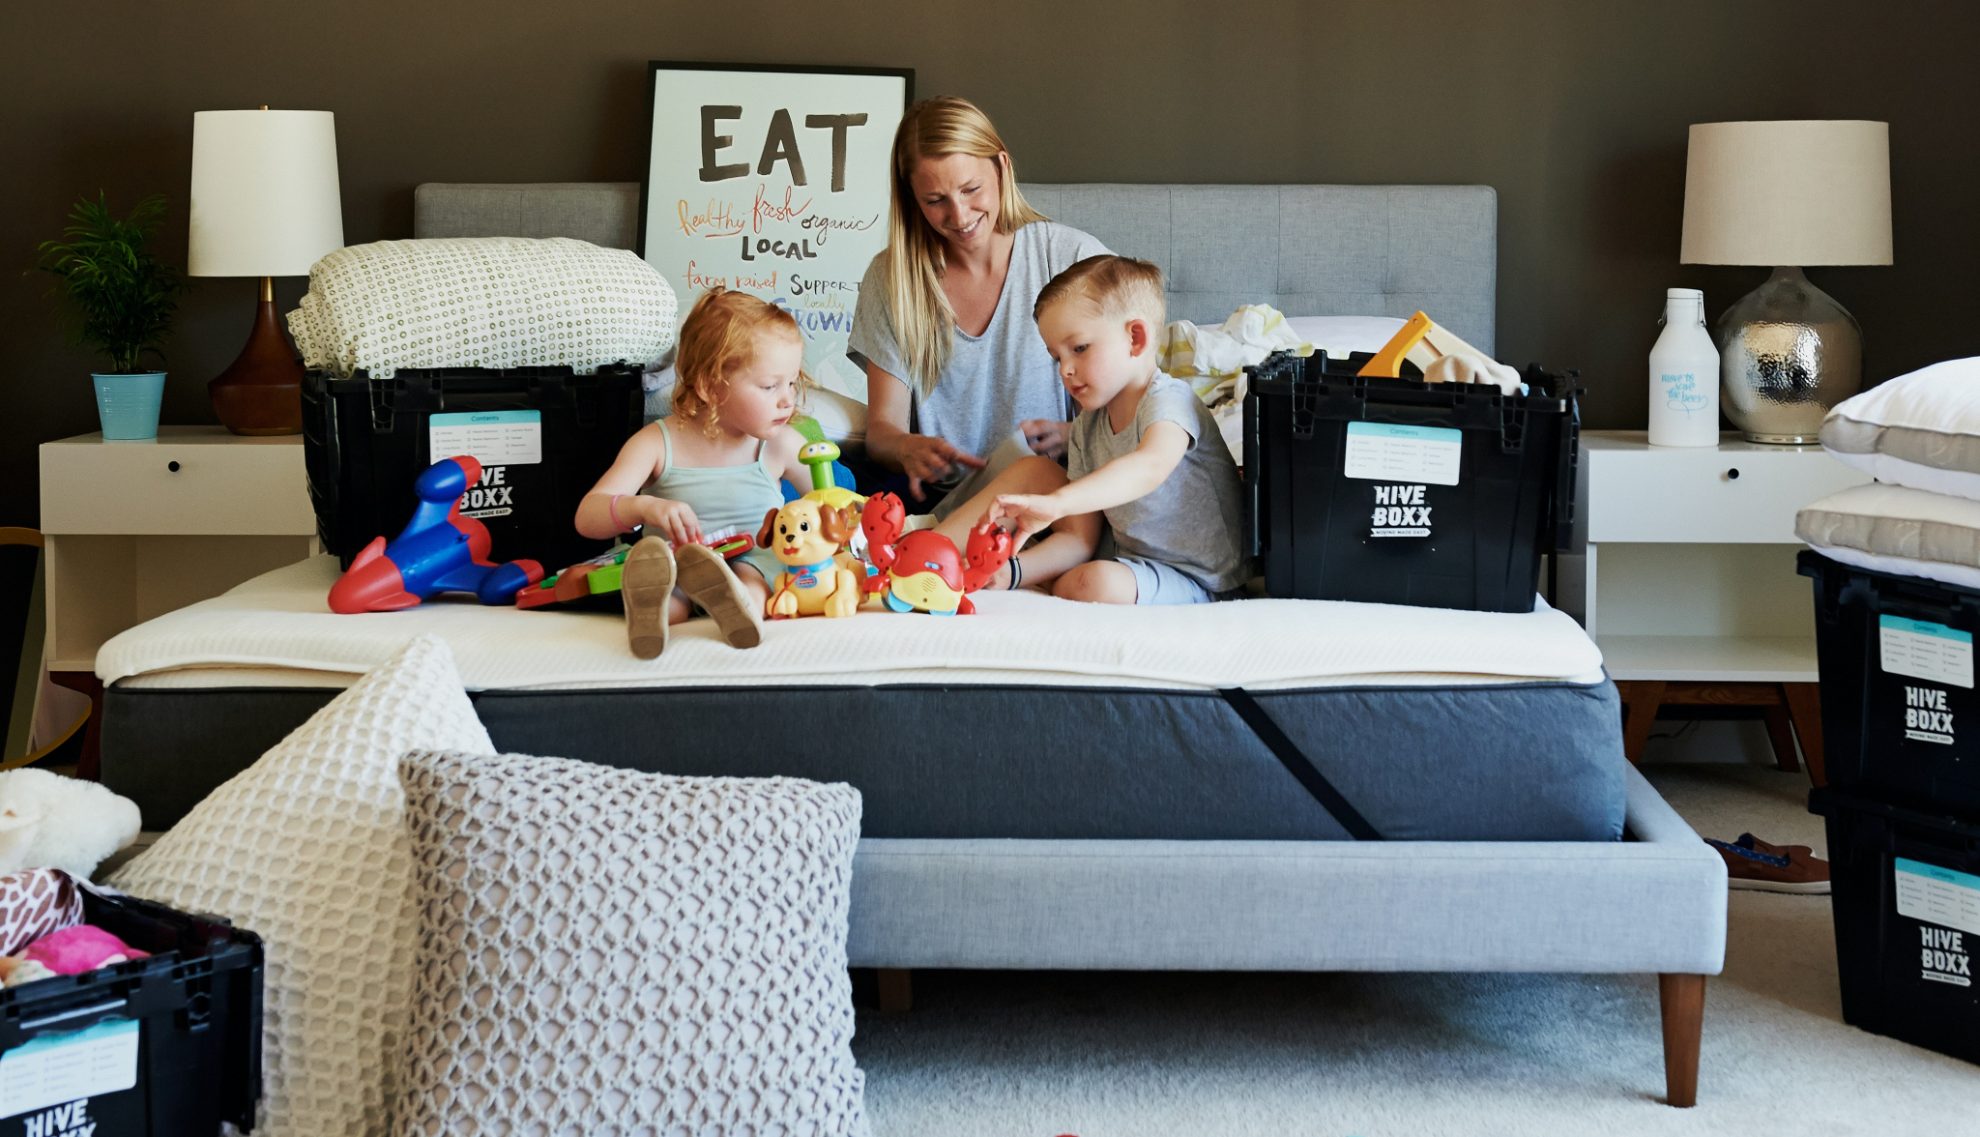 Woman and children on a bed surrounded by moving boxes